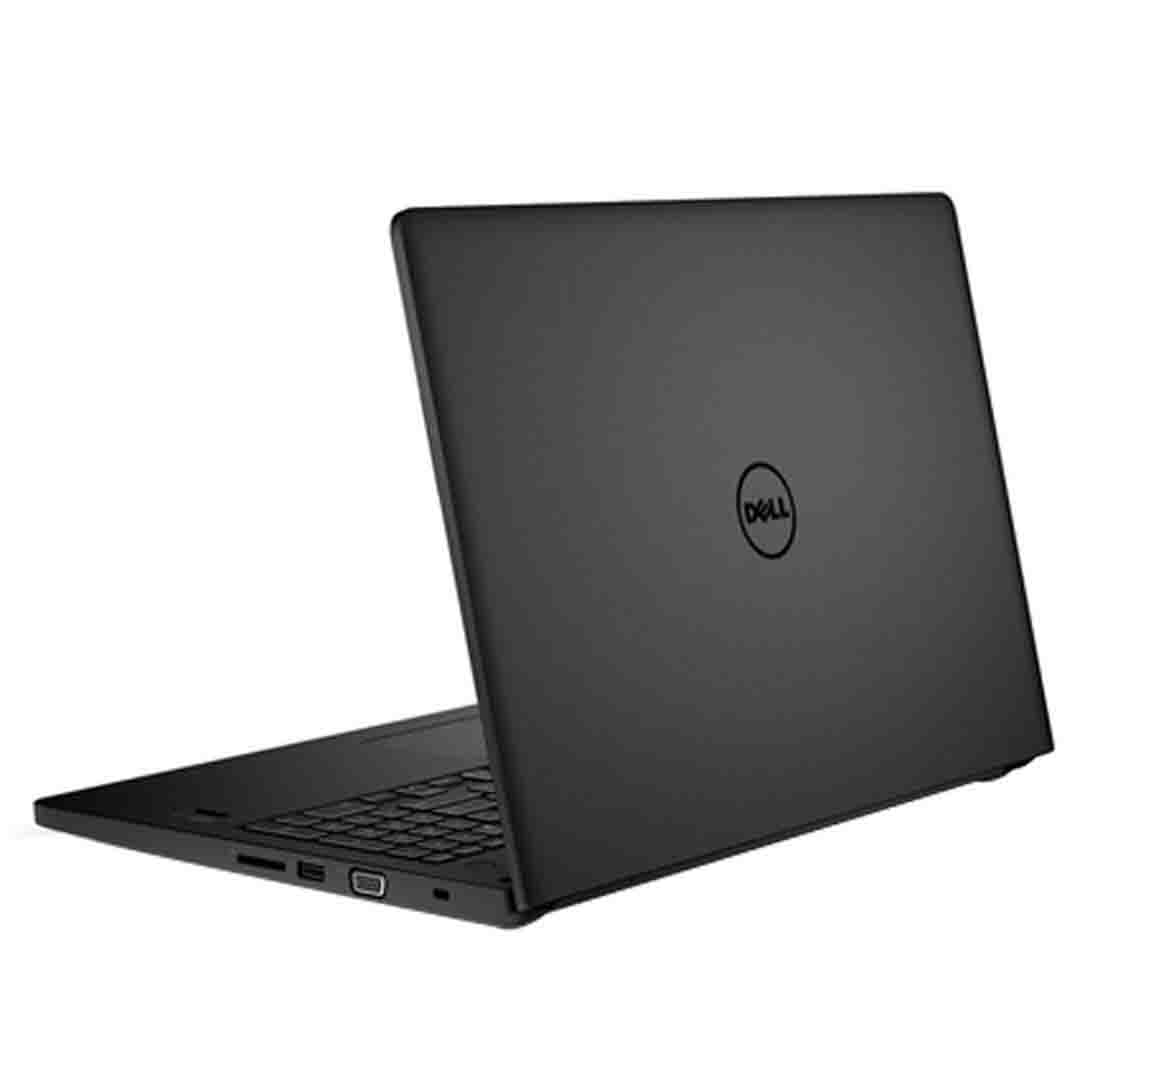 Dell Latitude 3570 Business Laptop, Intel Core i5-6th Generation CPU, 8GB RAM, 500GB HDD, 15.6 inch Touchscreen, Win 10 Pro, Refurbished Laptop